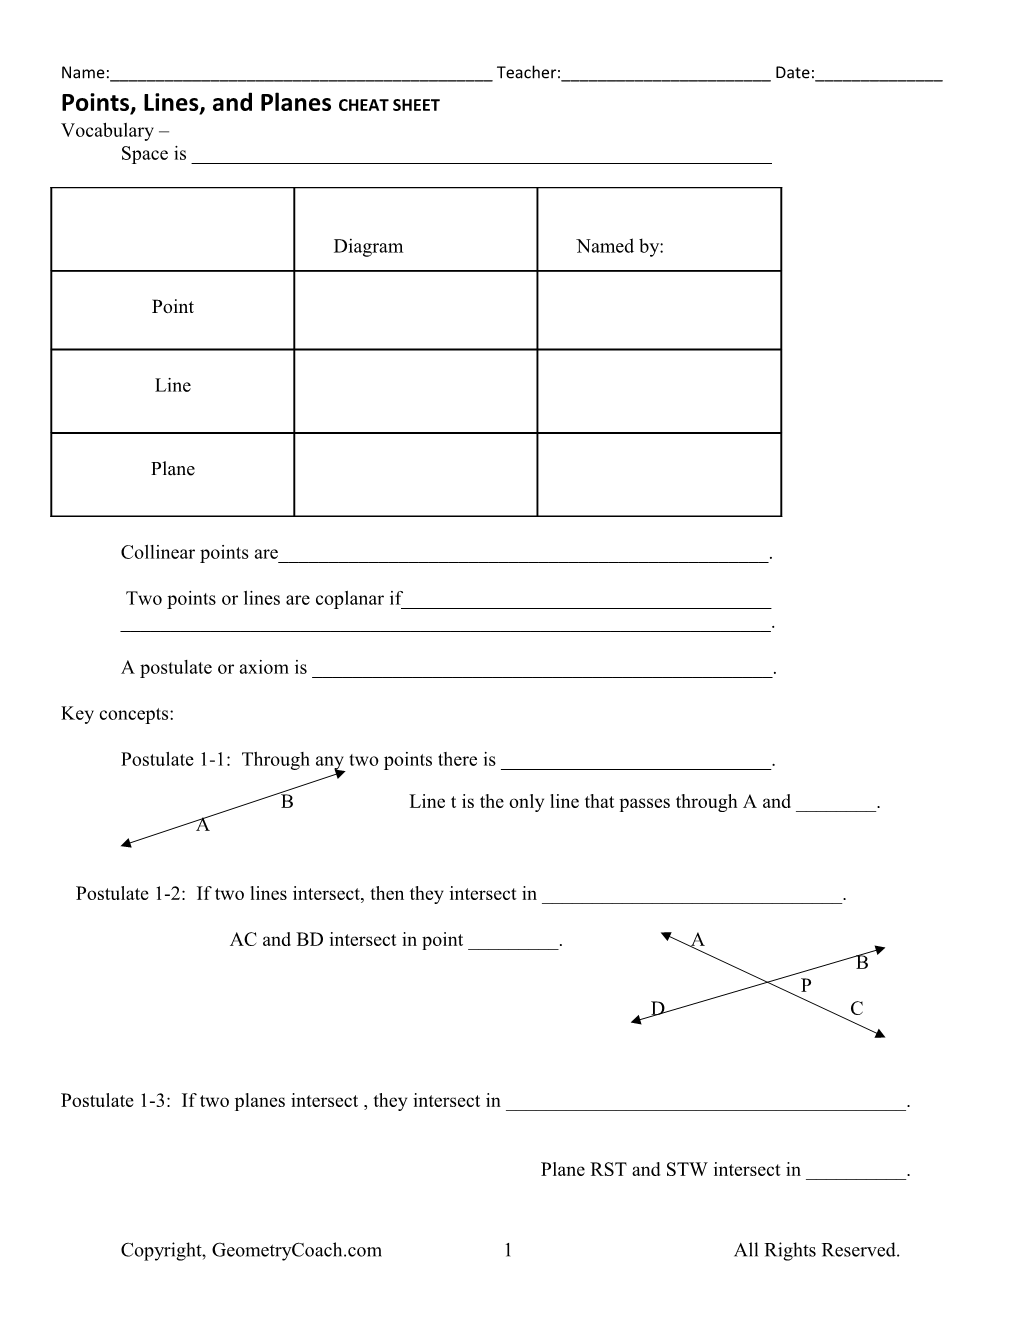 Geometry Guided Notes